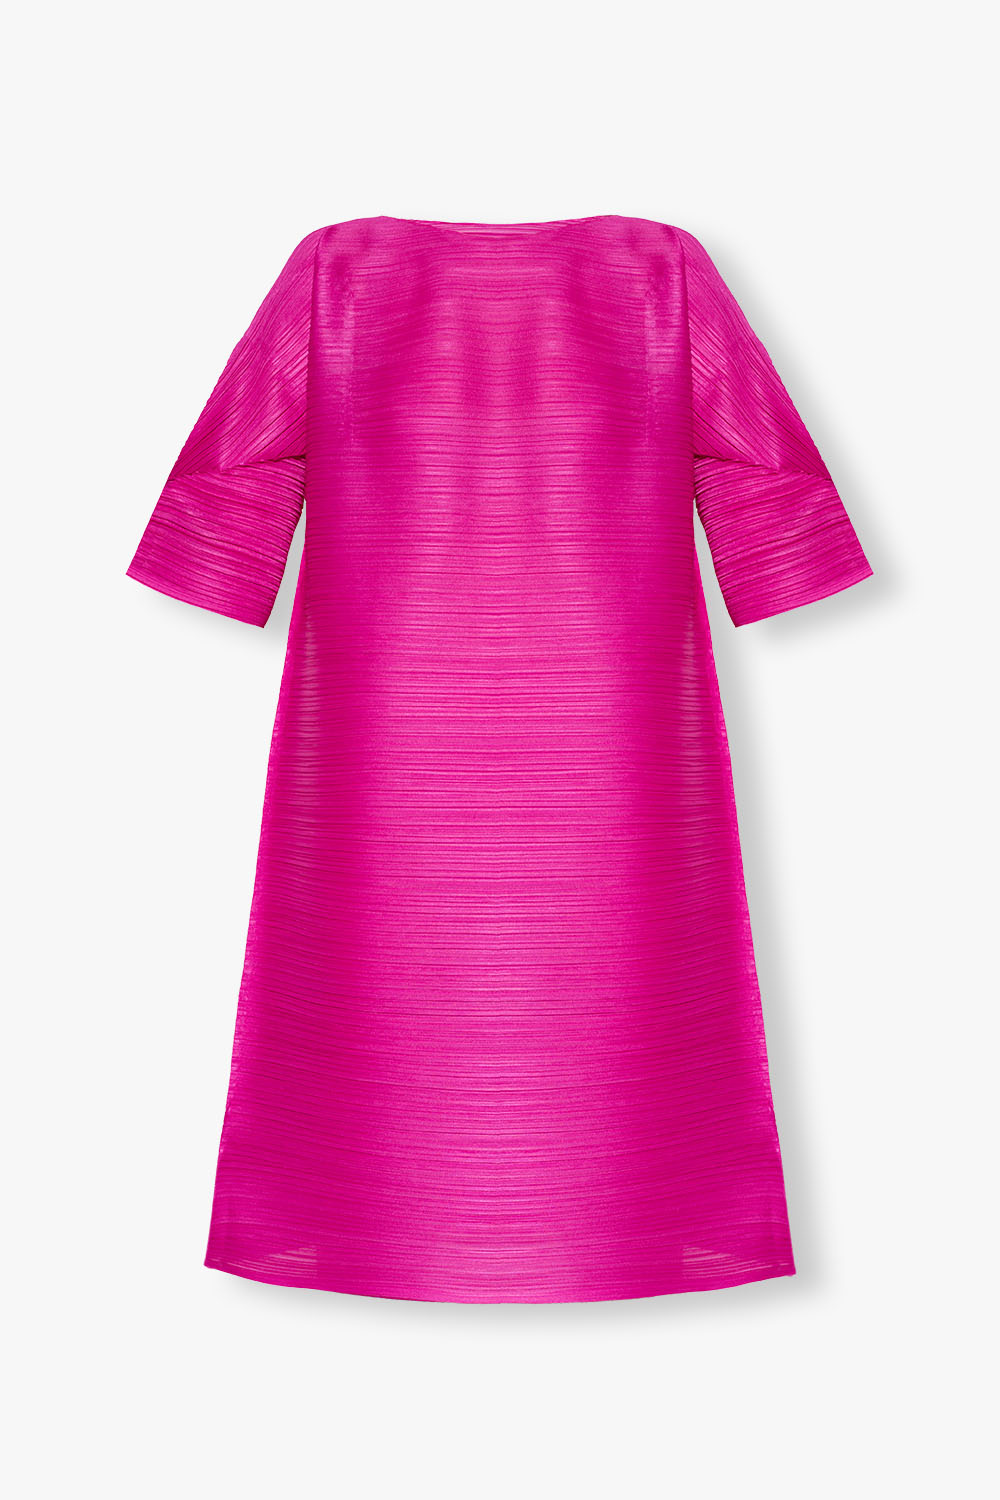 Issey Miyake Pleats Please 'Tour' pleated dress | Women's Clothing